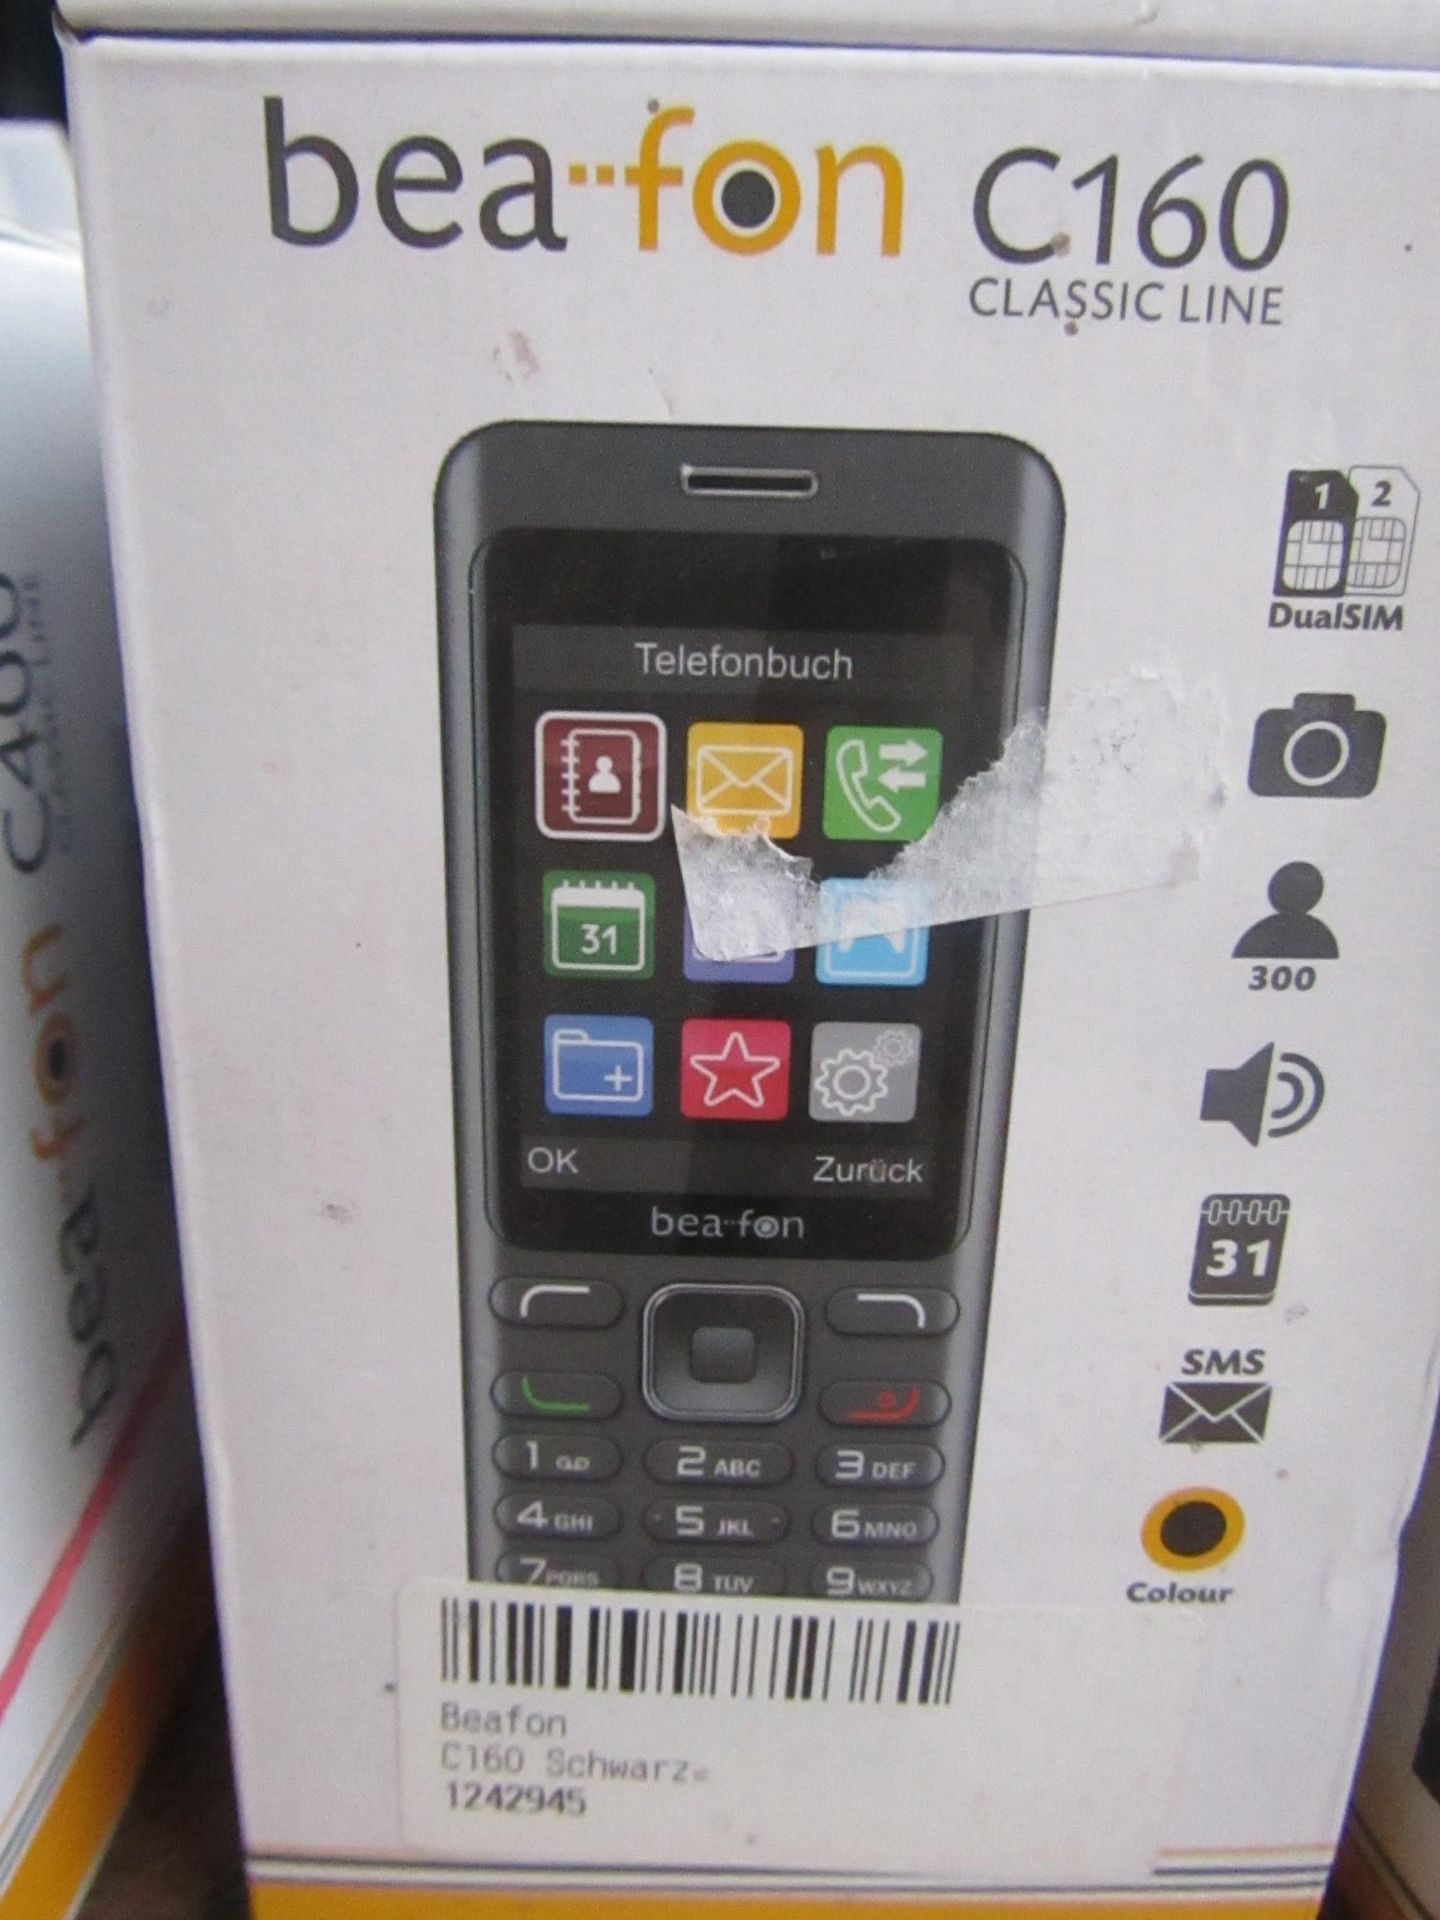 Bea fon C160 Mobile phone, unchecked and boxed